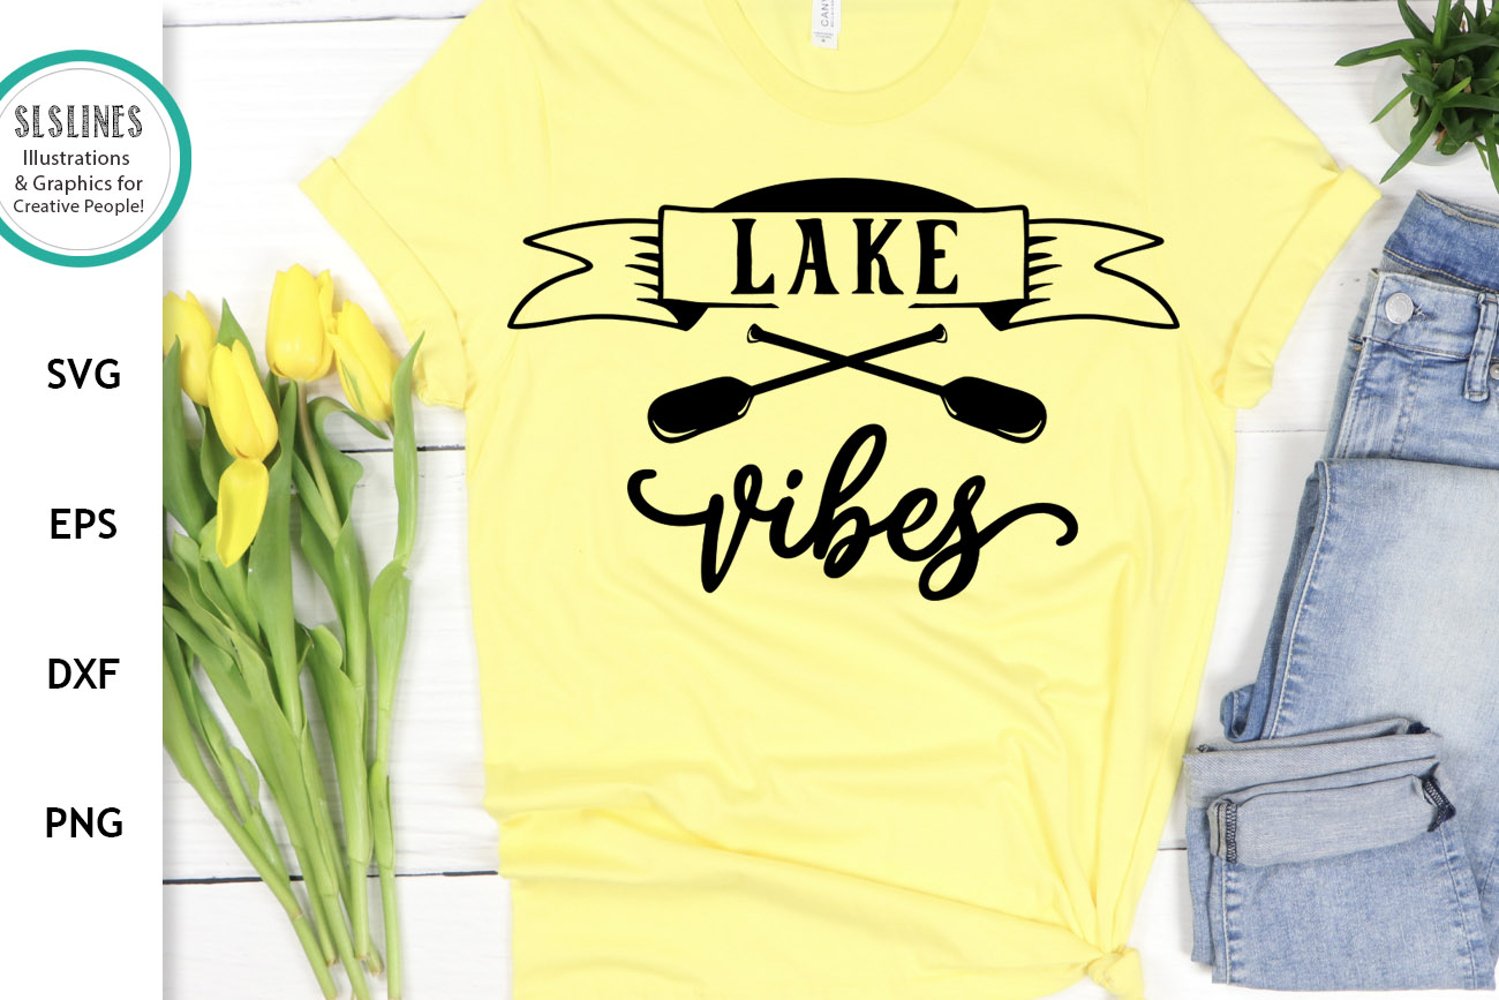 Get some lake vibes with this design.